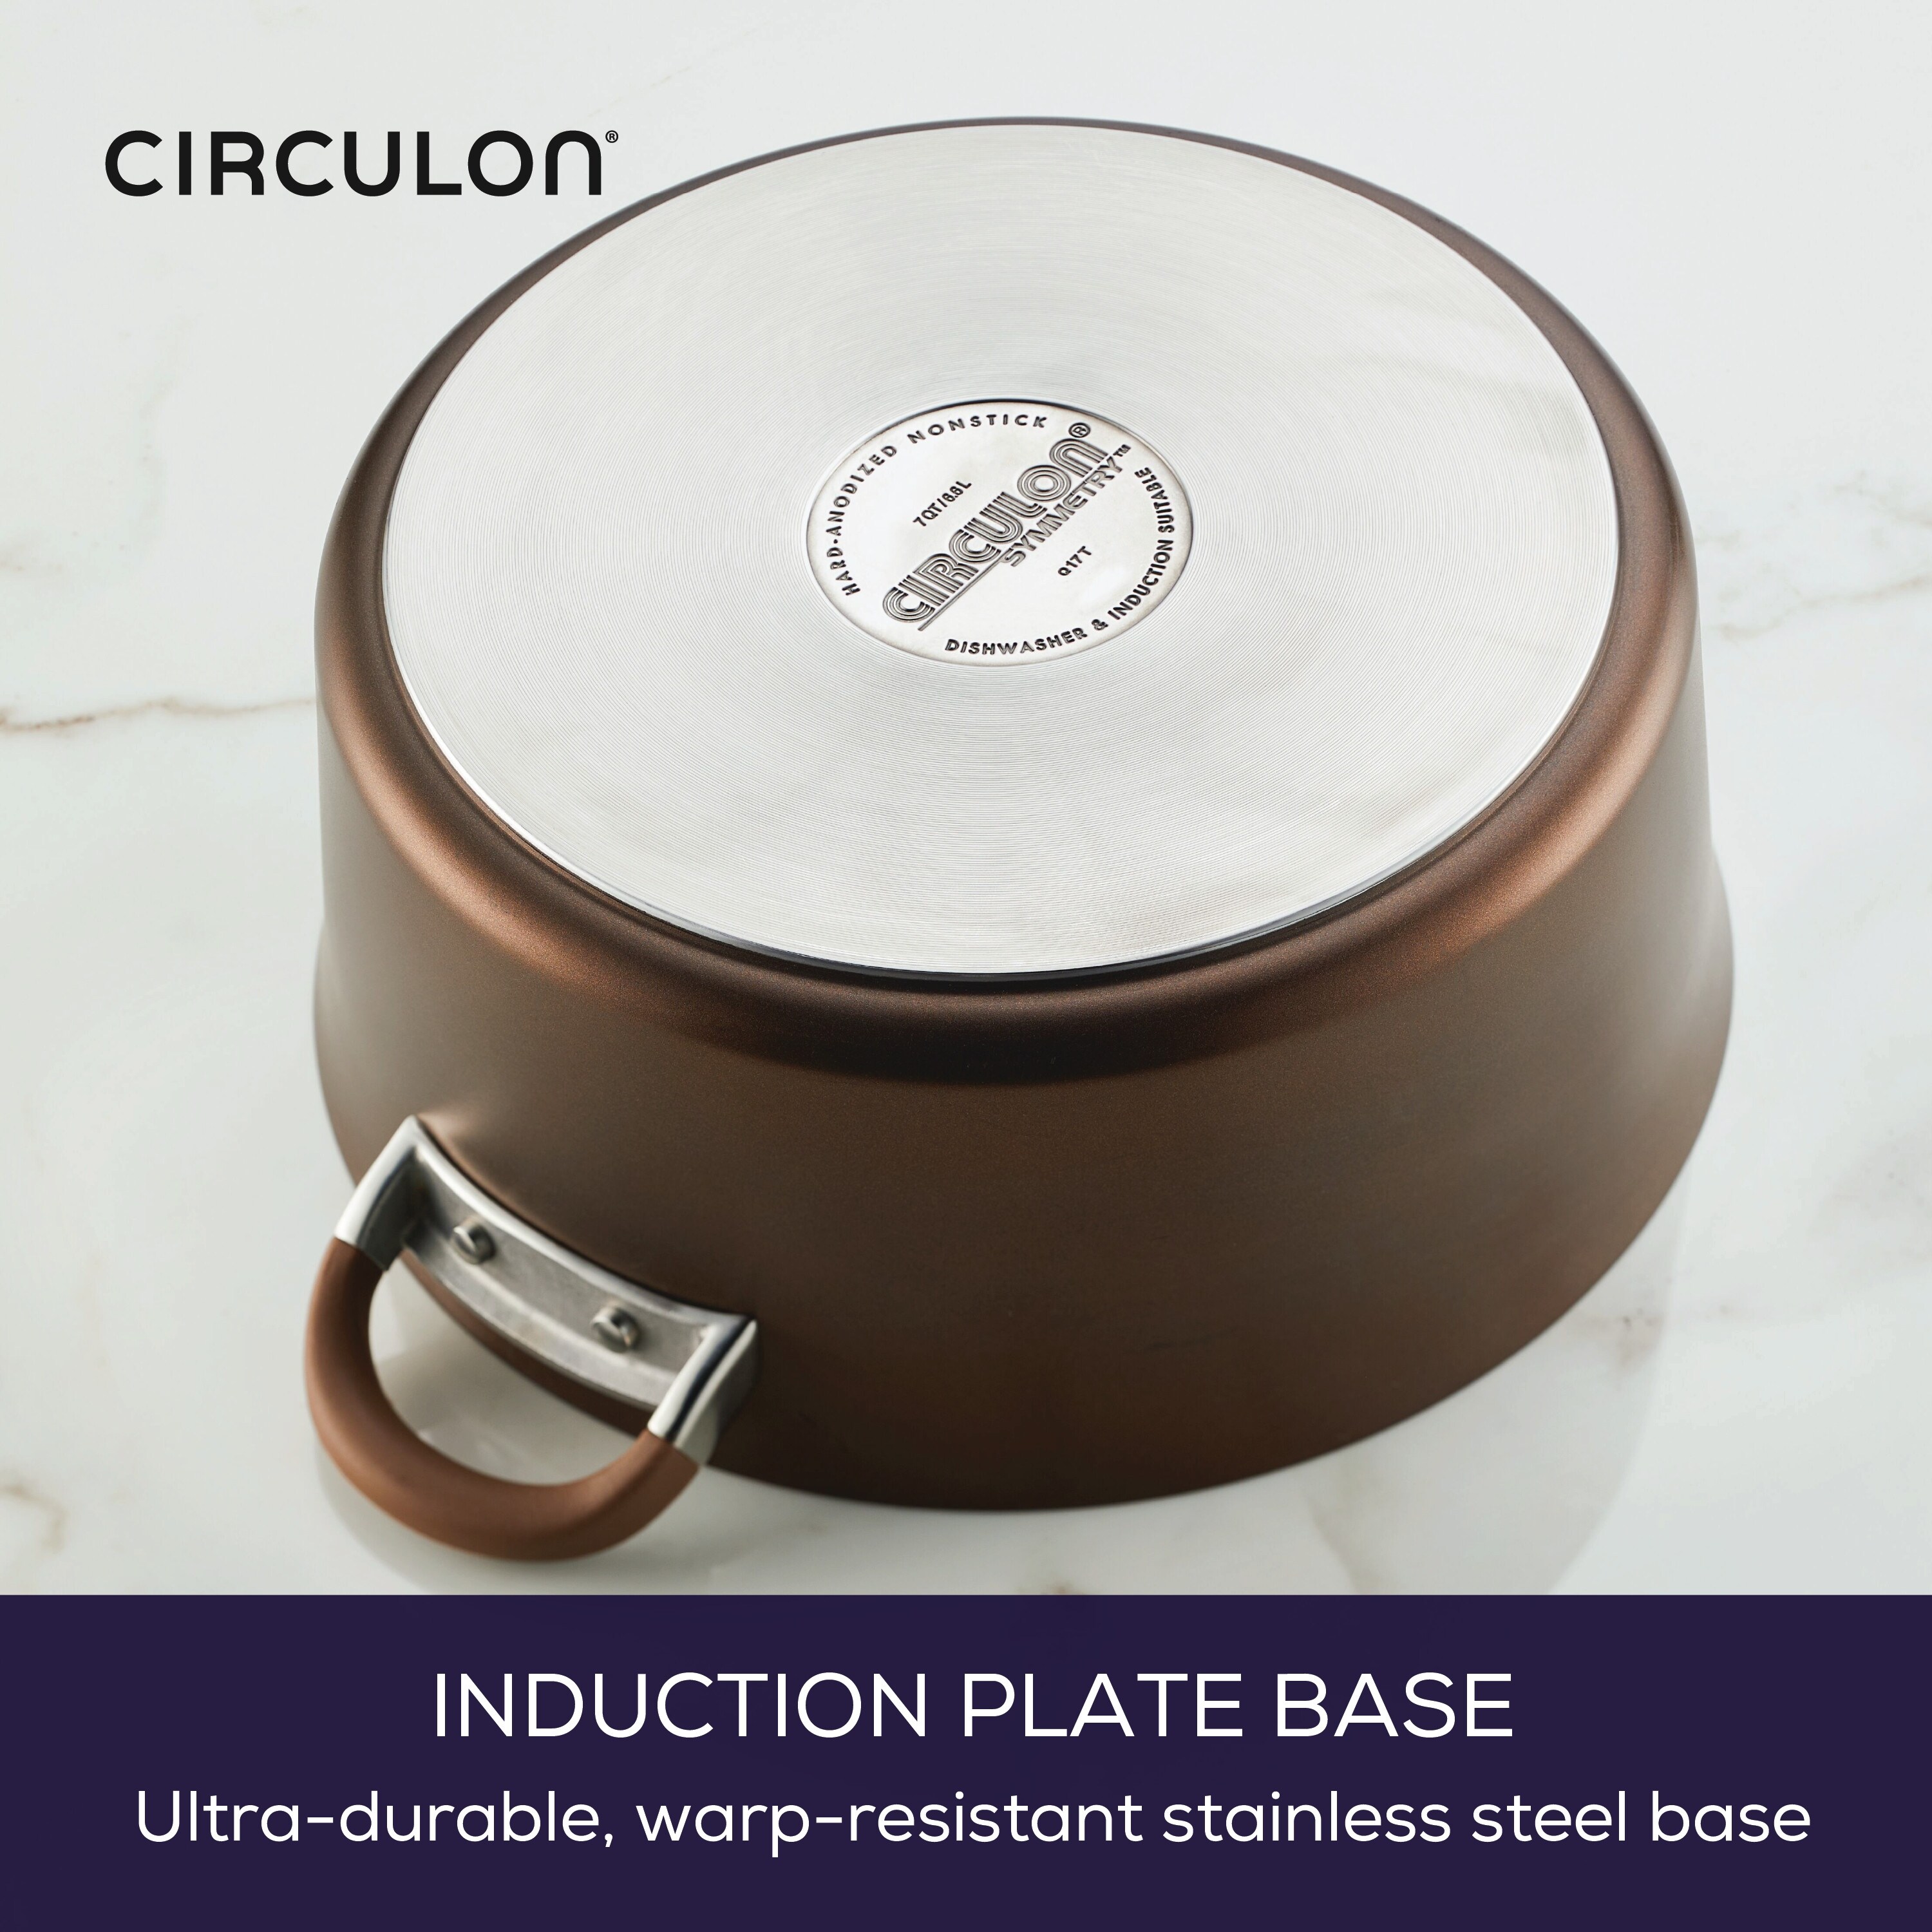 https://ak1.ostkcdn.com/images/products/is/images/direct/51bc96f97cccbfd4dc3d54d5a5ee42783d5f2ab1/Circulon-Symmetry-Hard-Anodized-Nonstick-Induction-Dutch-Oven-with-Lid%2C-7-Quart%2C-Chocolate.jpg